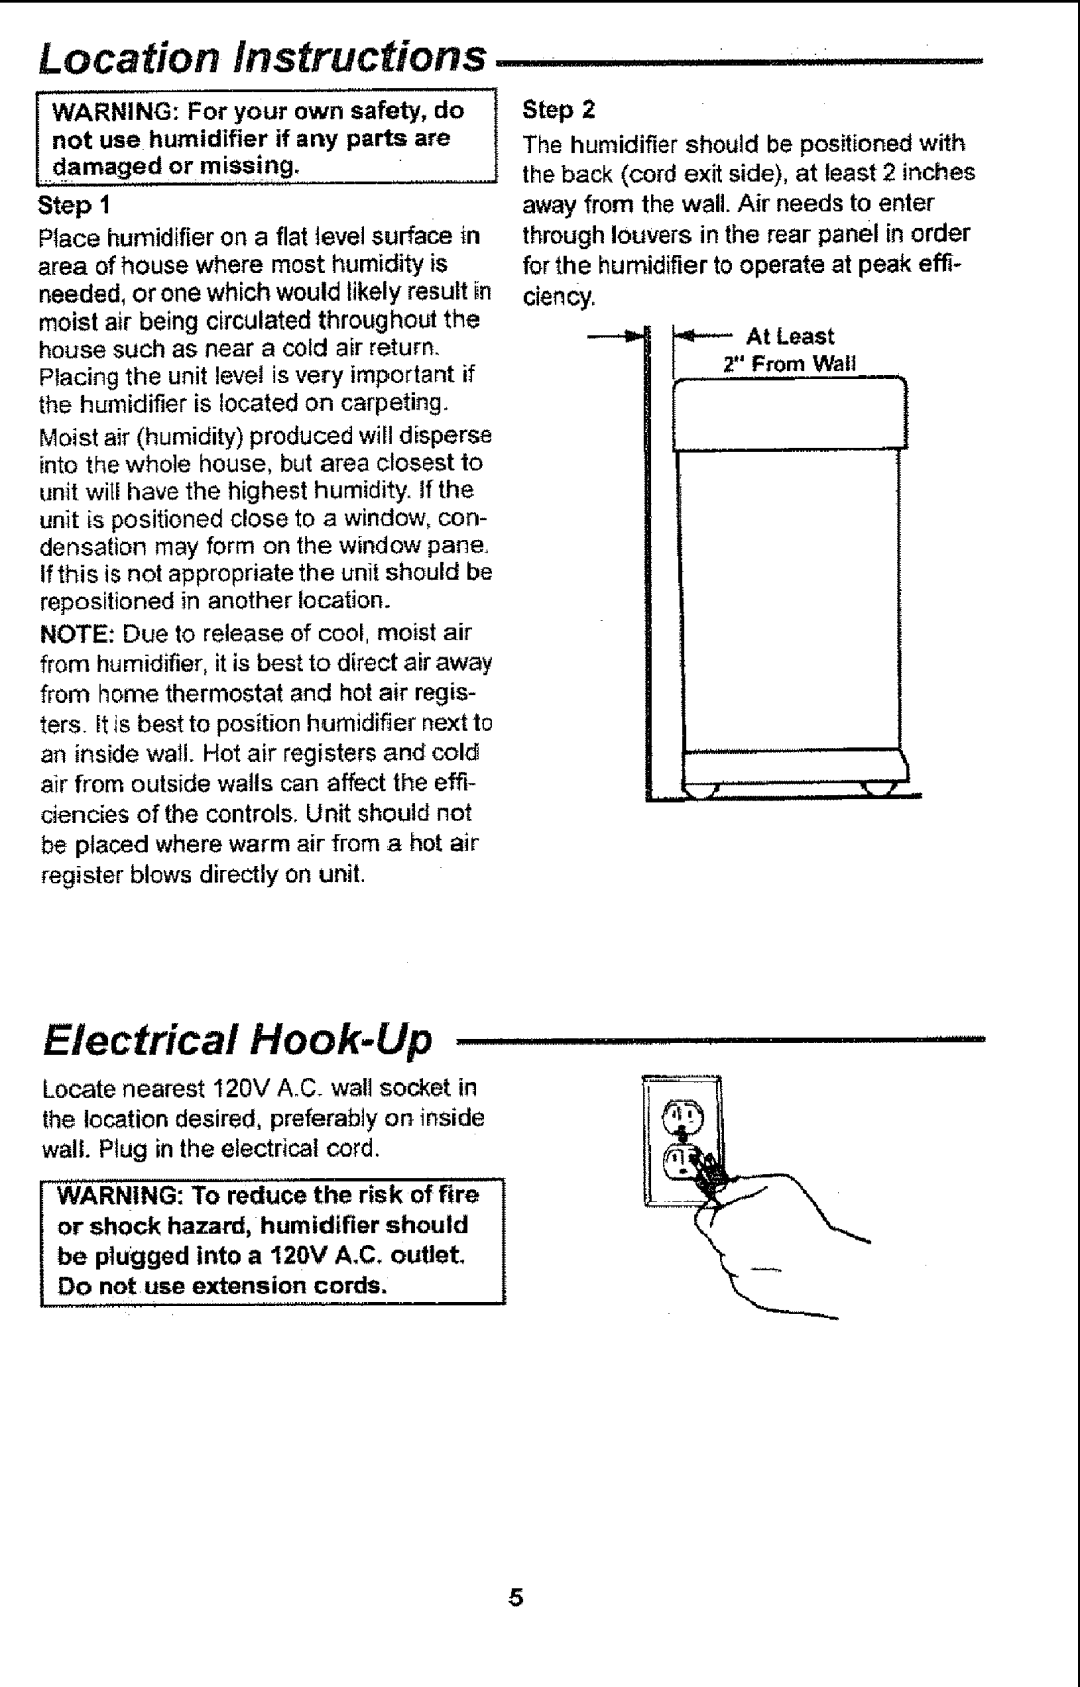 Sears 758.14451 Location Instructions, Electrical Hook-Up, damagedormiss!n, Step, ciency, Do not use extension cords 